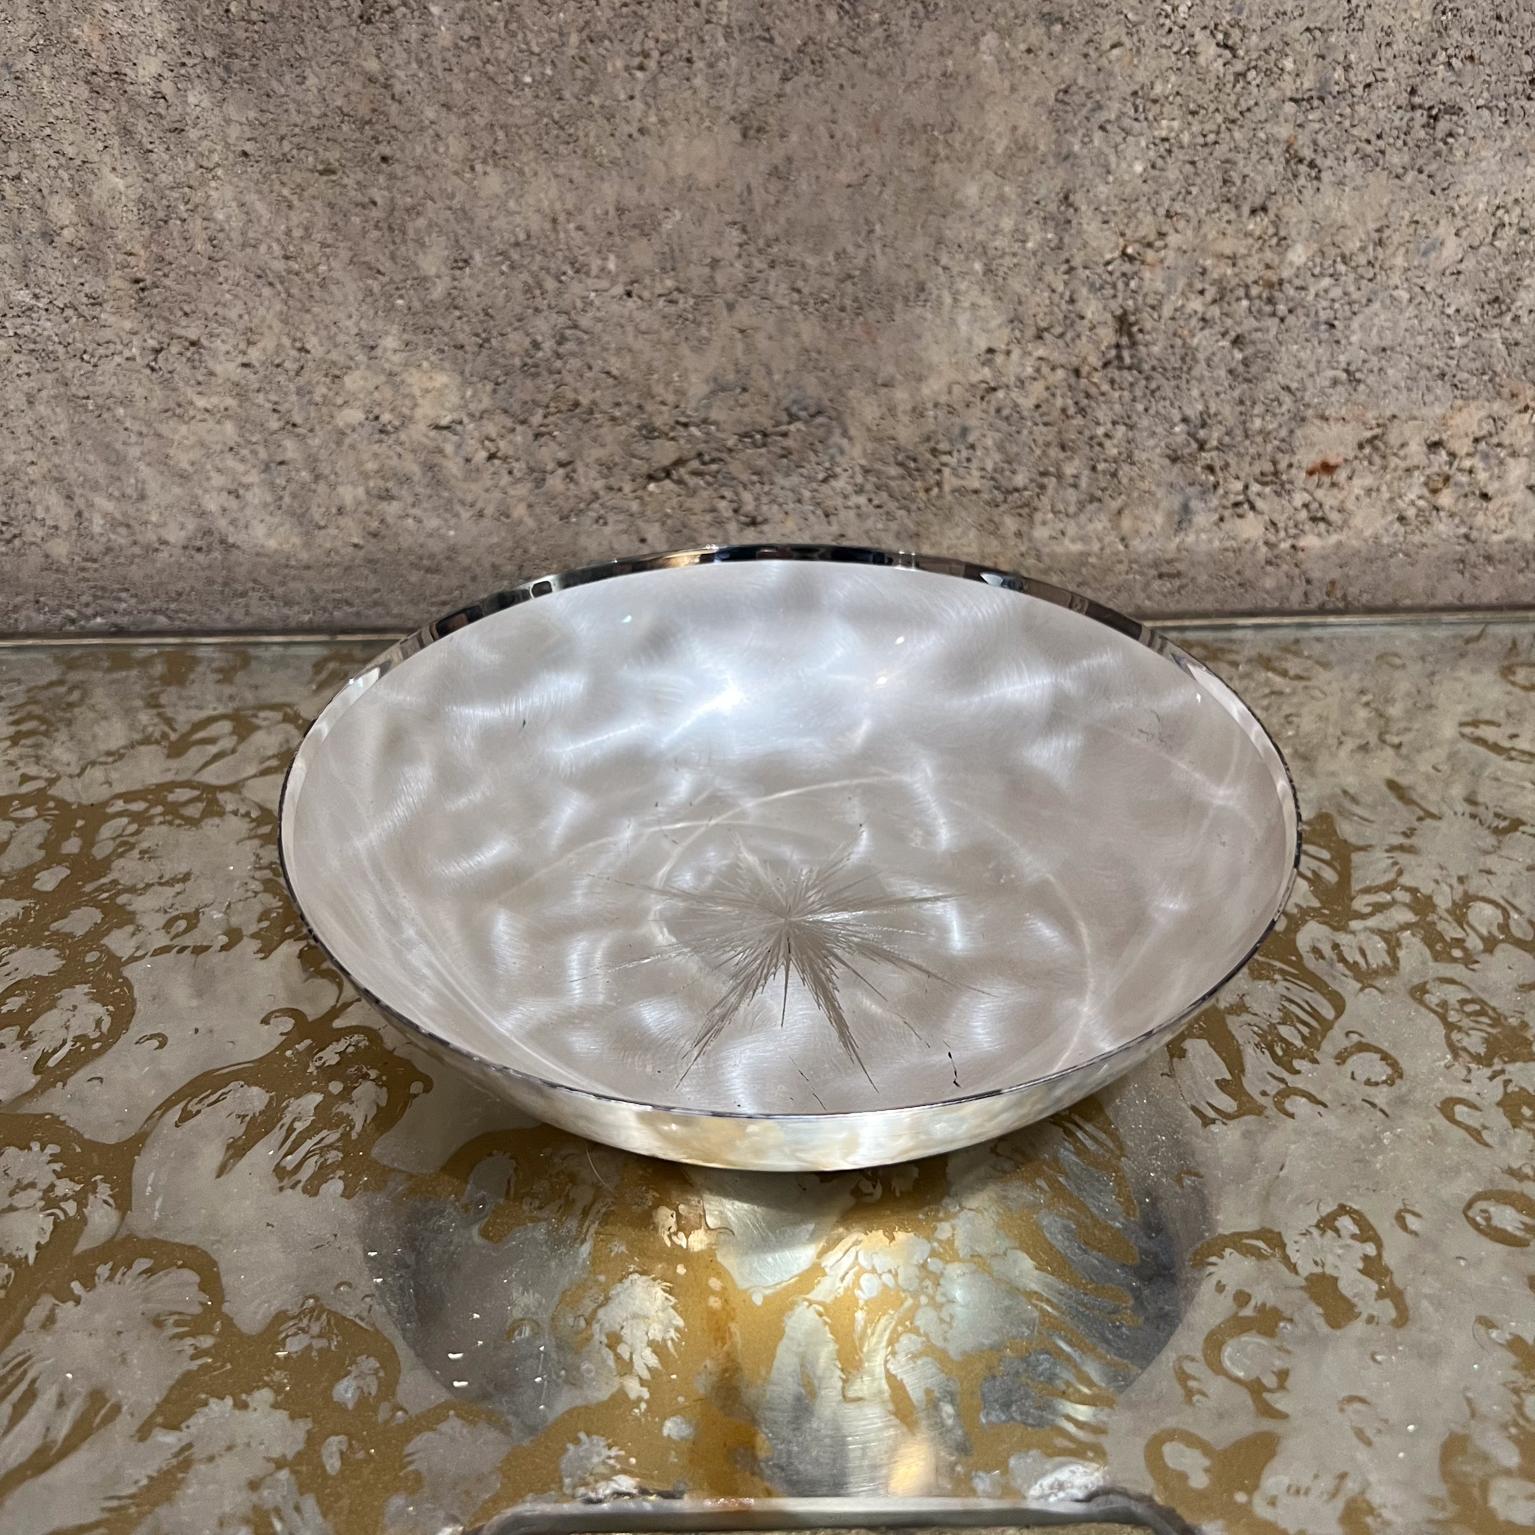 AMBIANIC presents
1960s WMF Ikora Star Silver Plate Serving Dish
EP Brass Germany
WMF stamped
1.75 h x 7 diameter
Preowned original vintage condition
See images for condition.